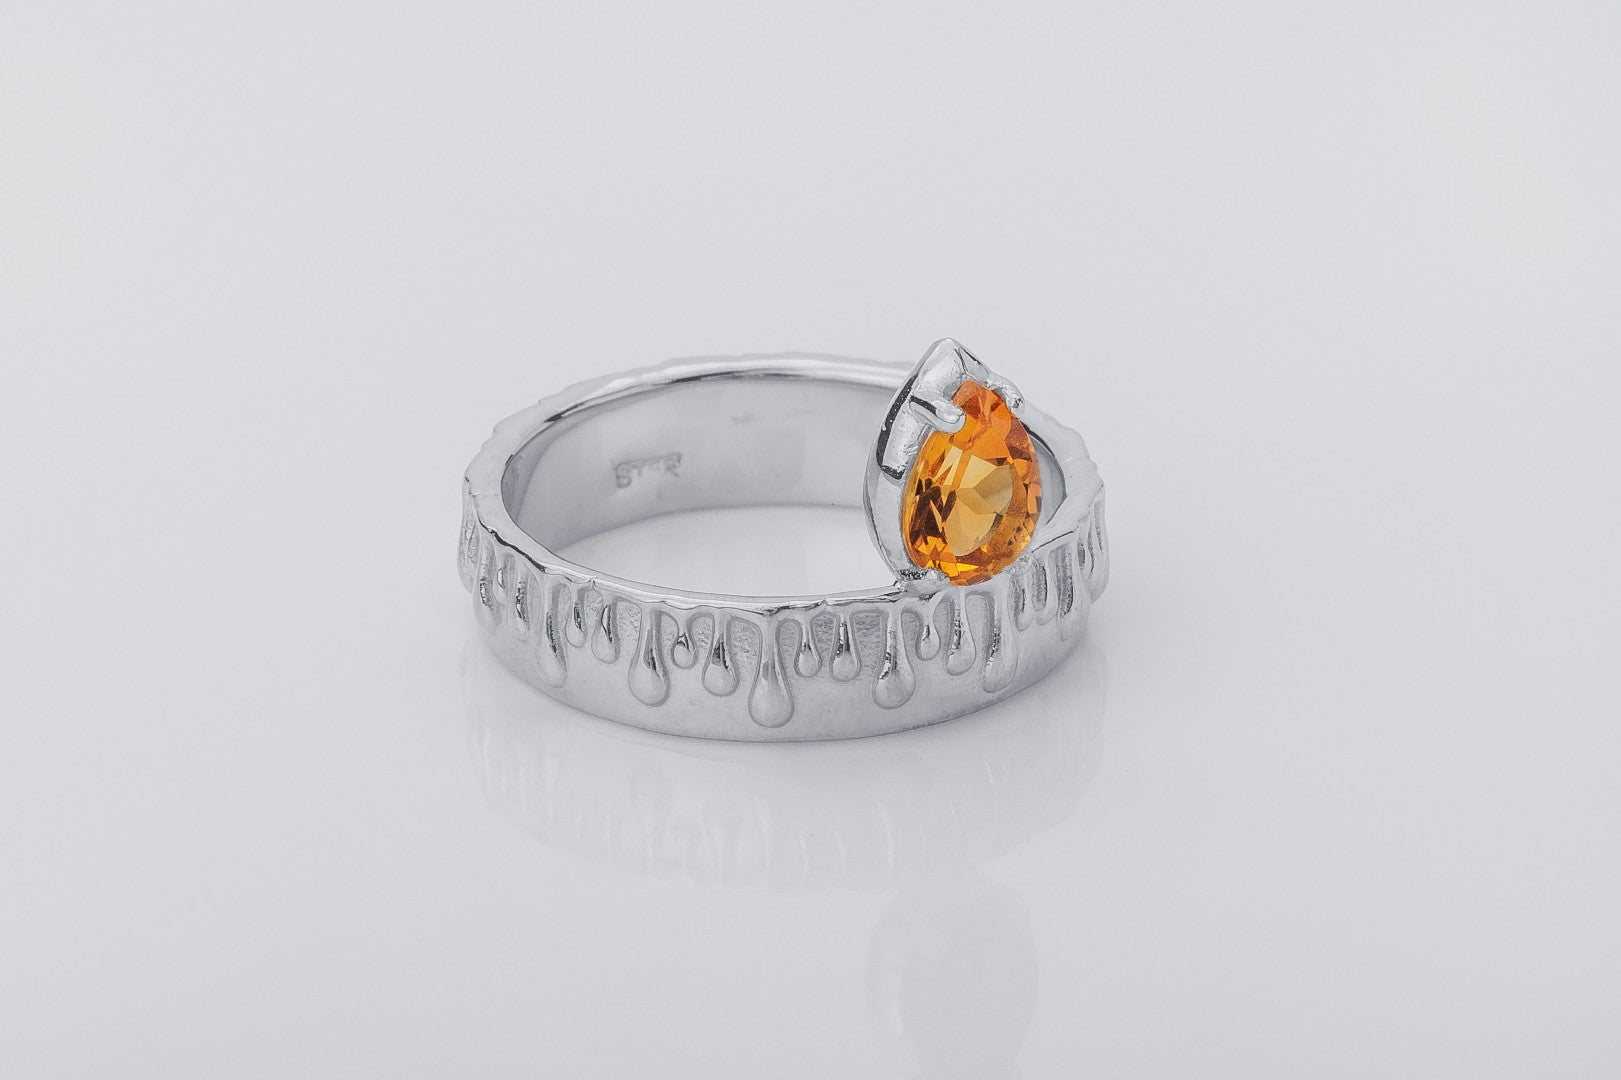 Candle Light Citrine Ring with Molten Wax, Rhodium plated 925 silver